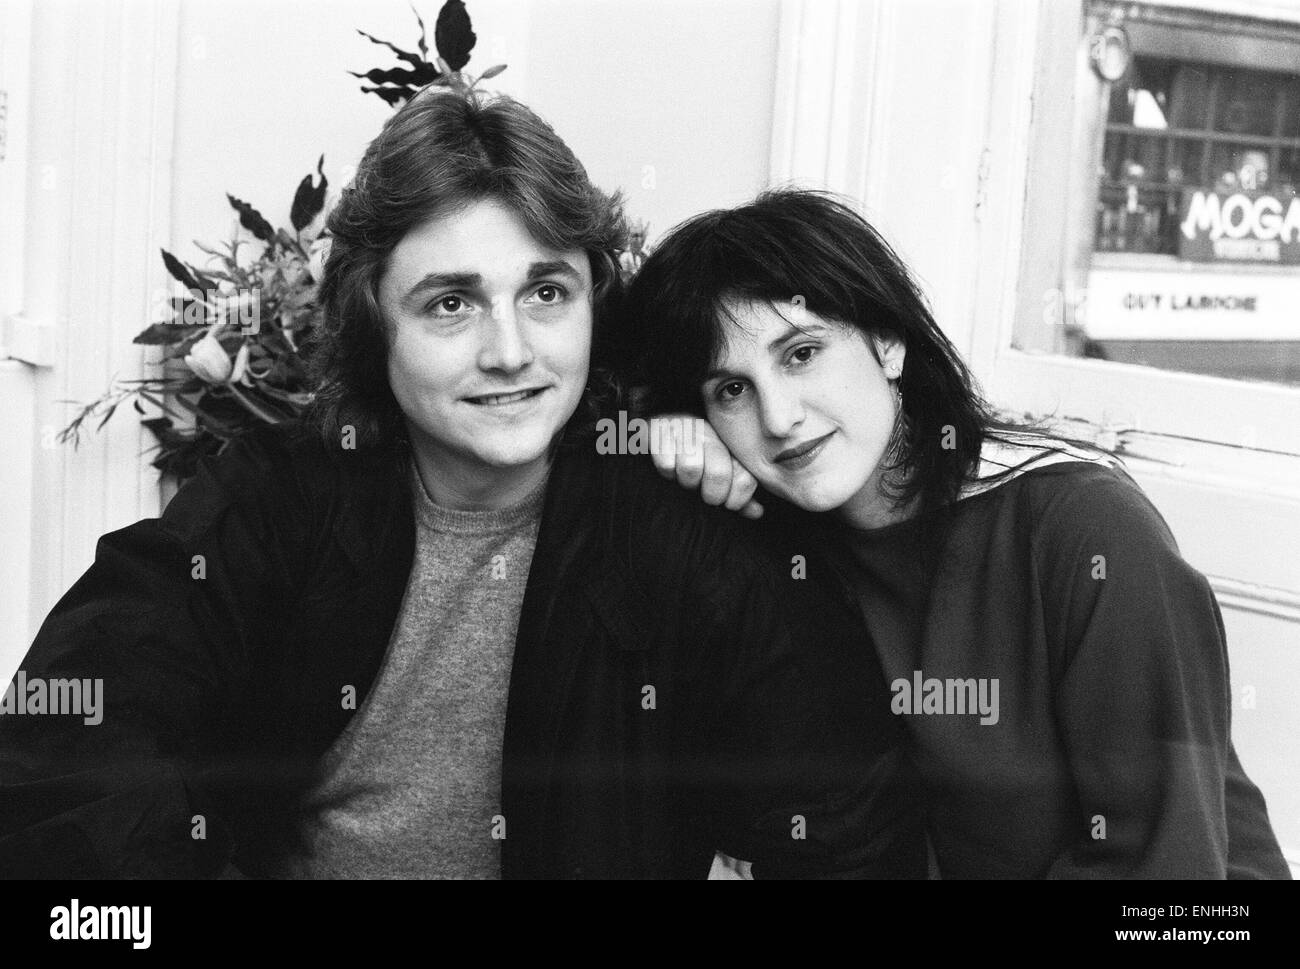 David & Elizabeth Emanuel, fashion designers, phootographed at their studio in Brooke Street, Mayfair, London, 11th March 1981. It was recently announced that they have been chosen to design the wedding dress of Lady Diana Spencer. Stock Photo